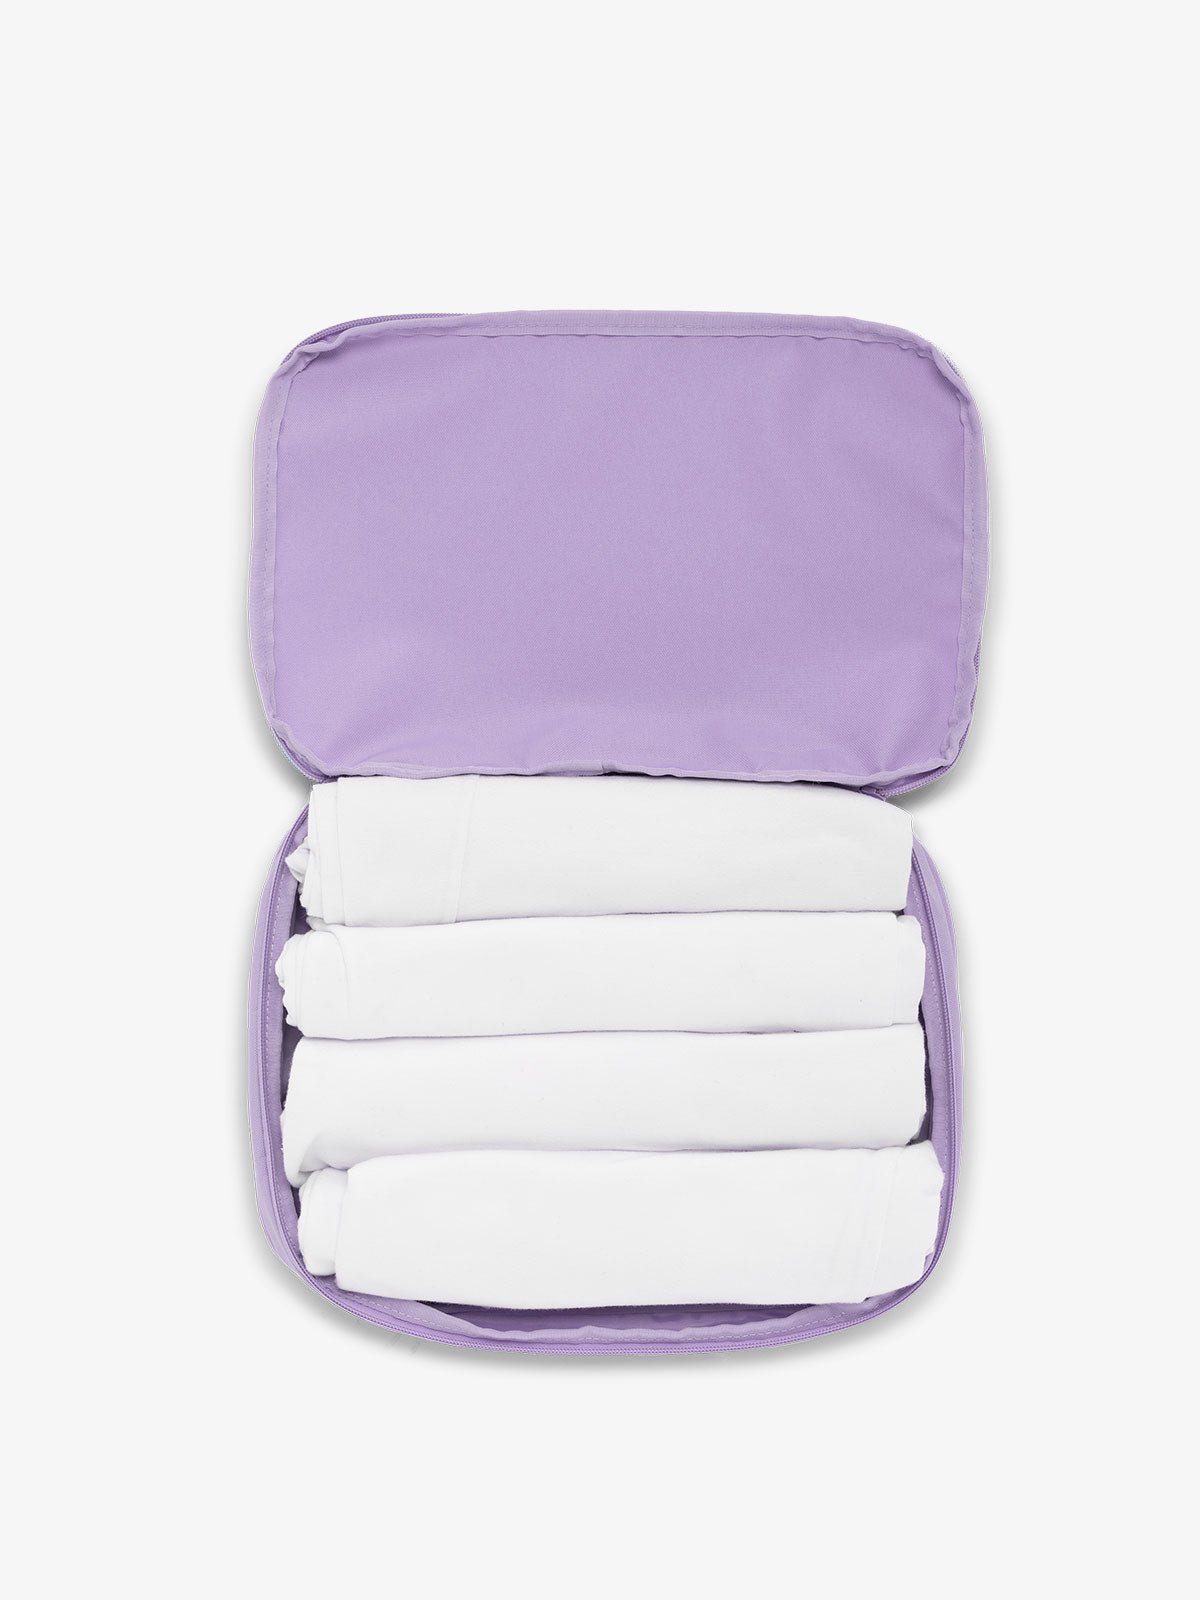 CALPAK packing cubes for travel in purple